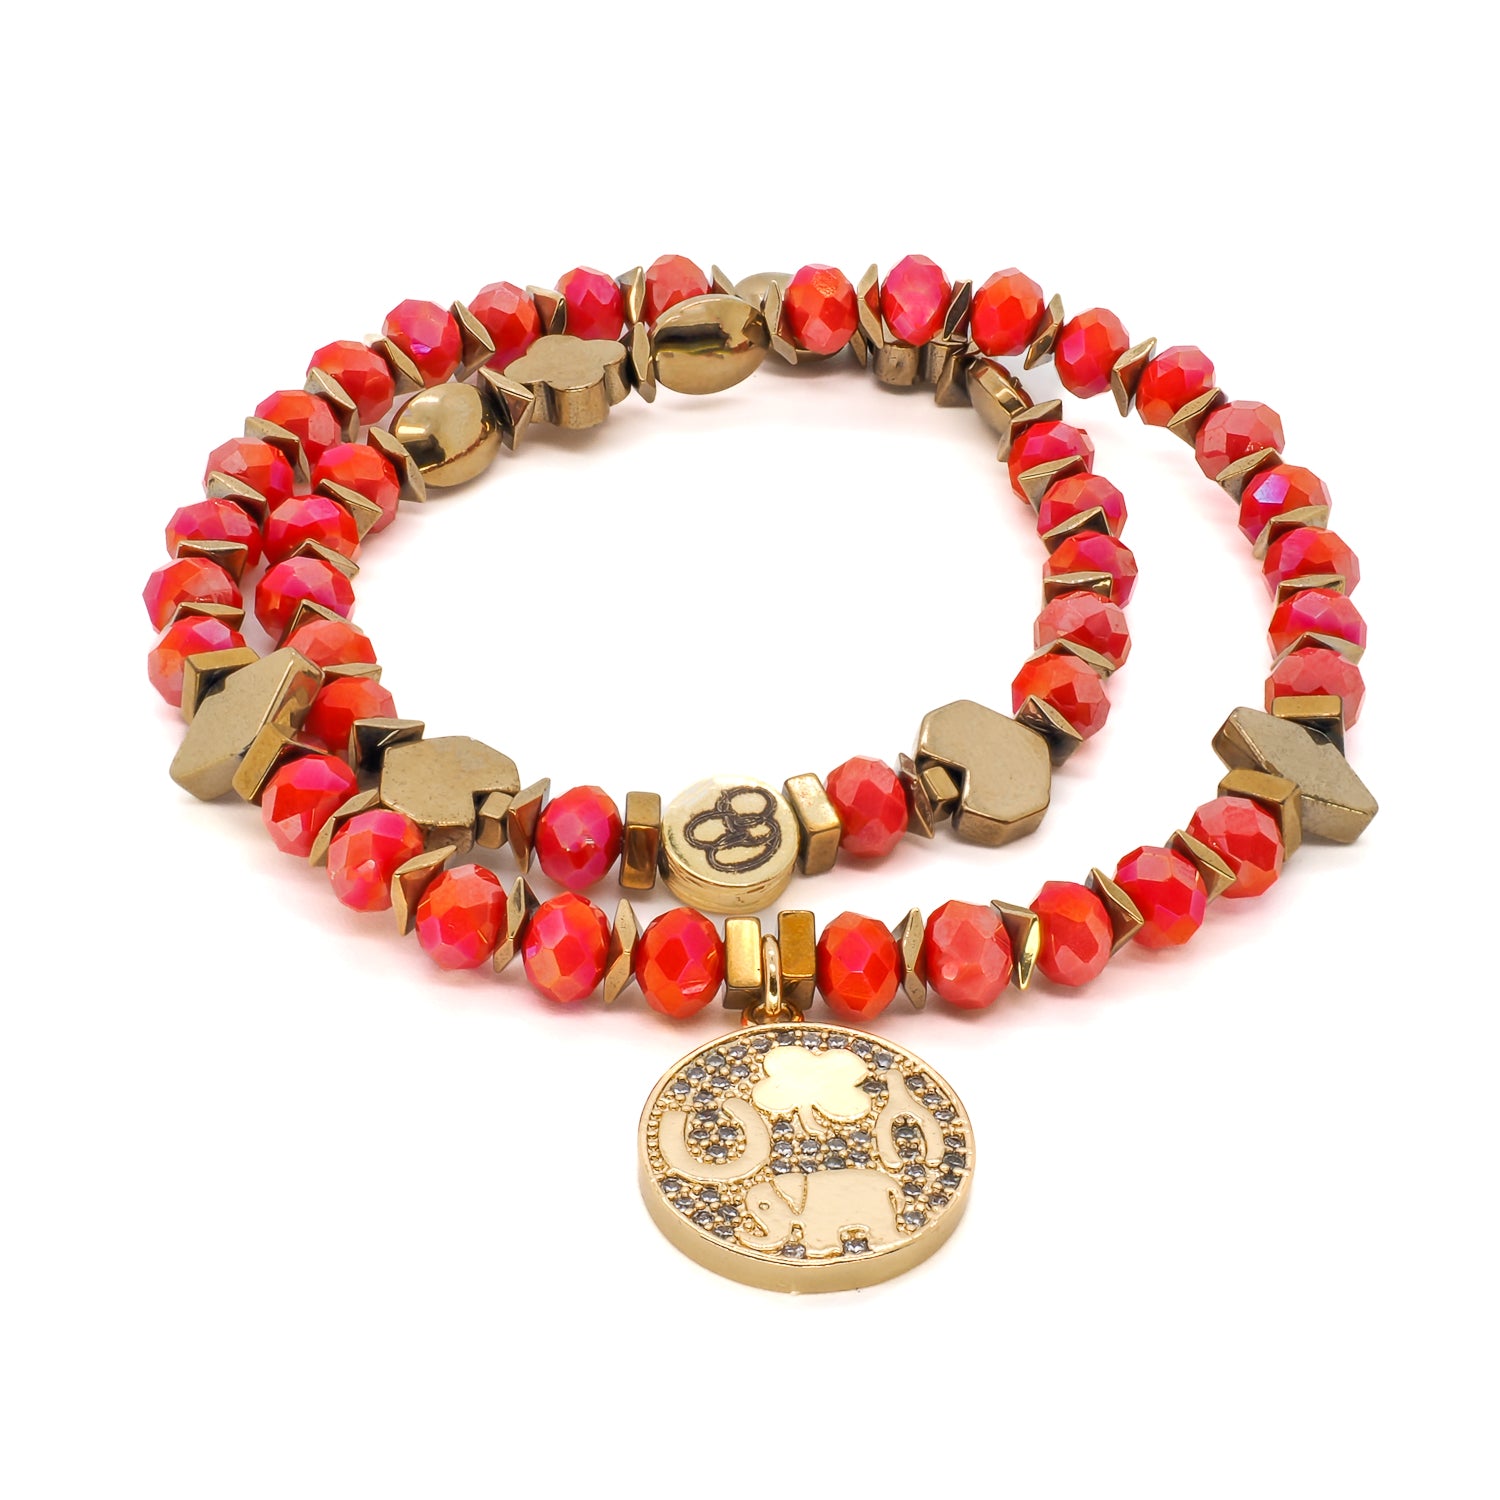 Embrace the vibrant energy of the Lucky Symbol Bracelet, featuring orange crystal beads and a gold symbol charm, a beautiful handmade accessory.